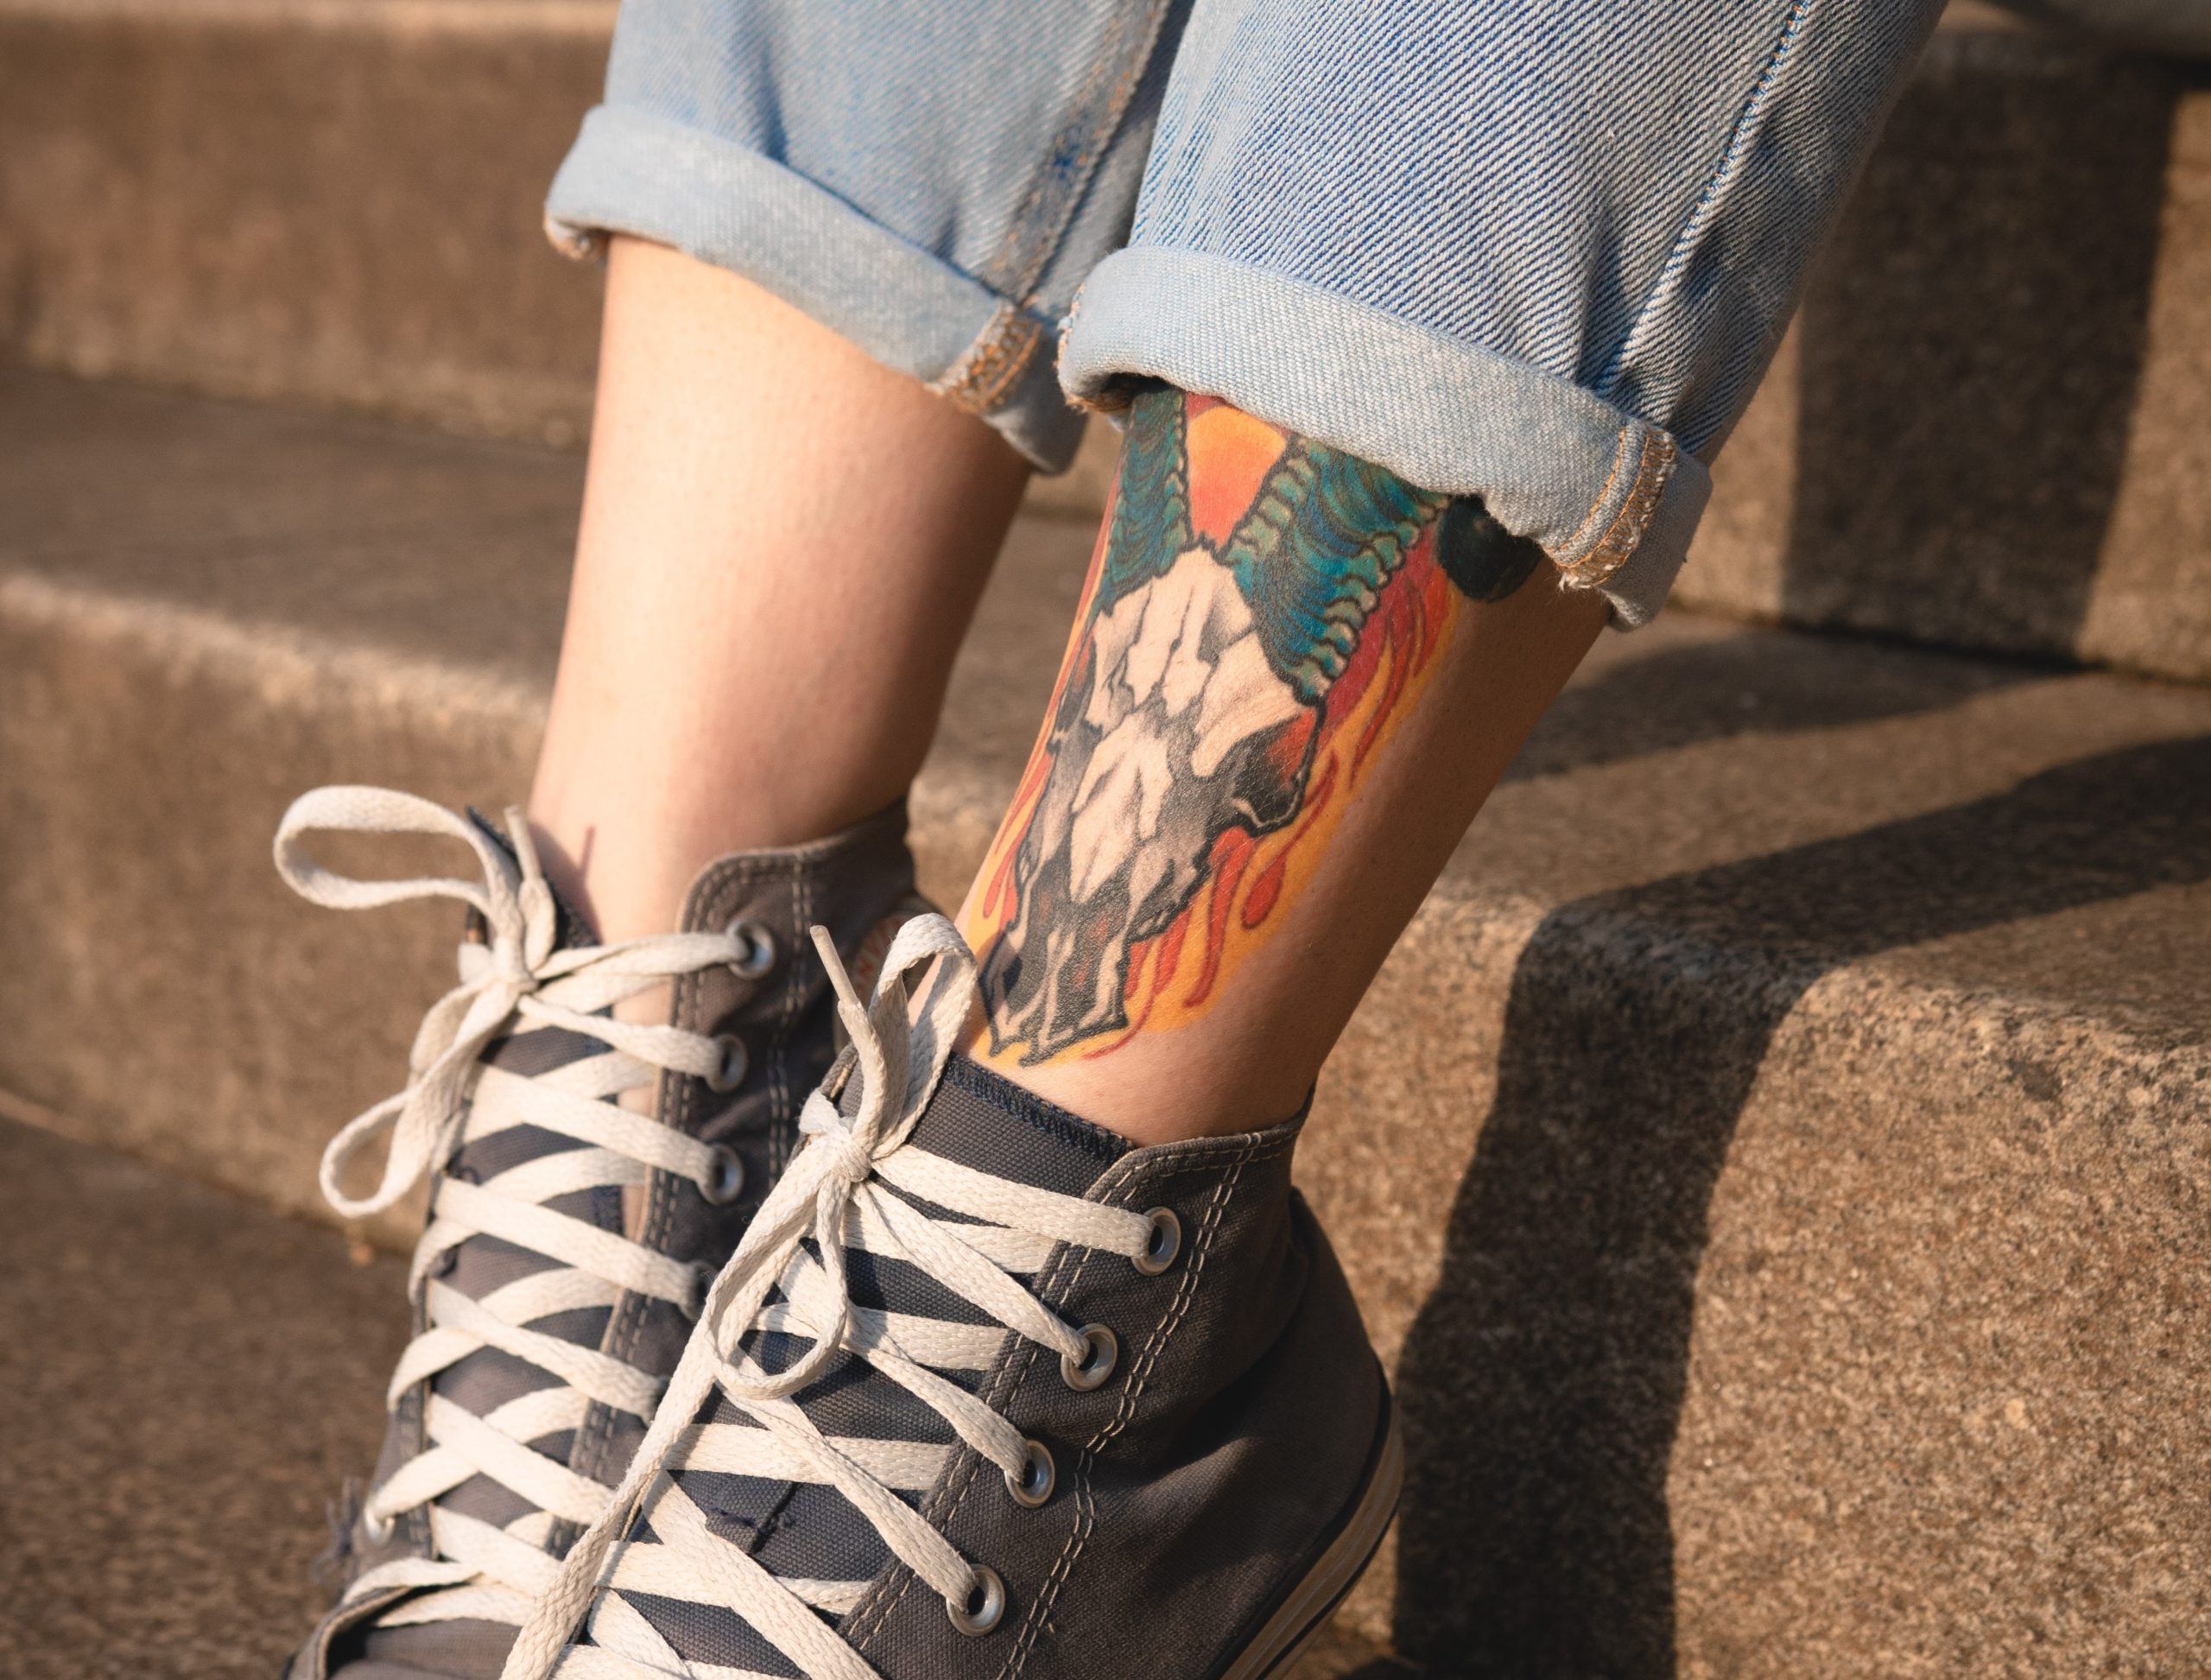 girl's legs with colour tattoo wearing converse